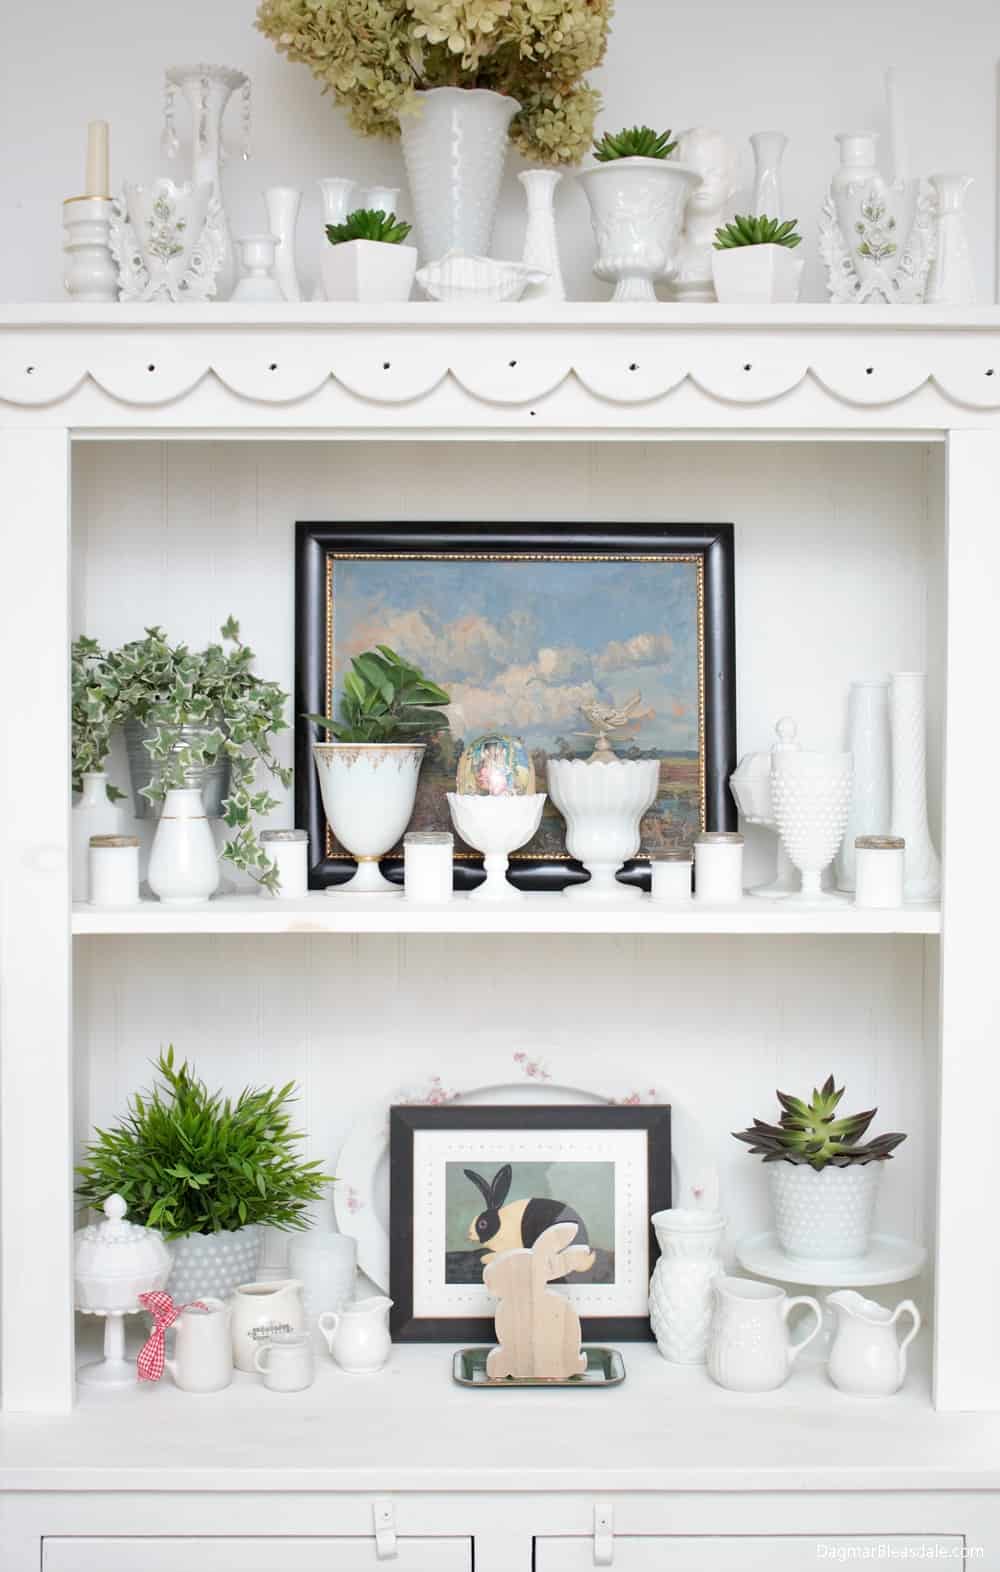 milk glass collection in white dresser with plants and pictures